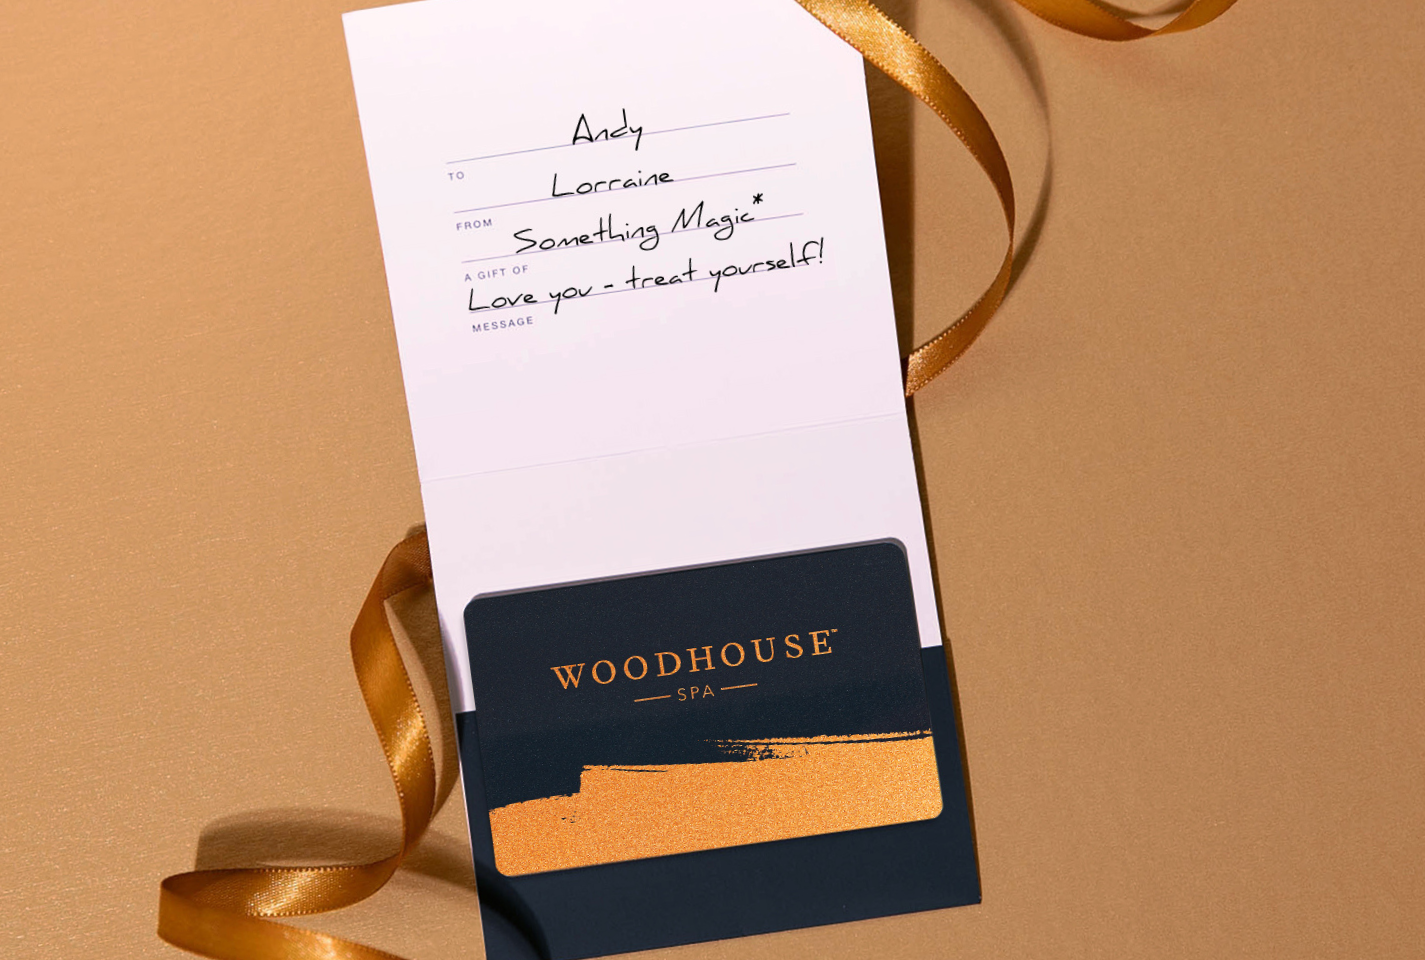 Woodhouse spa gift card. Holiday gift card. Online spa gift card.